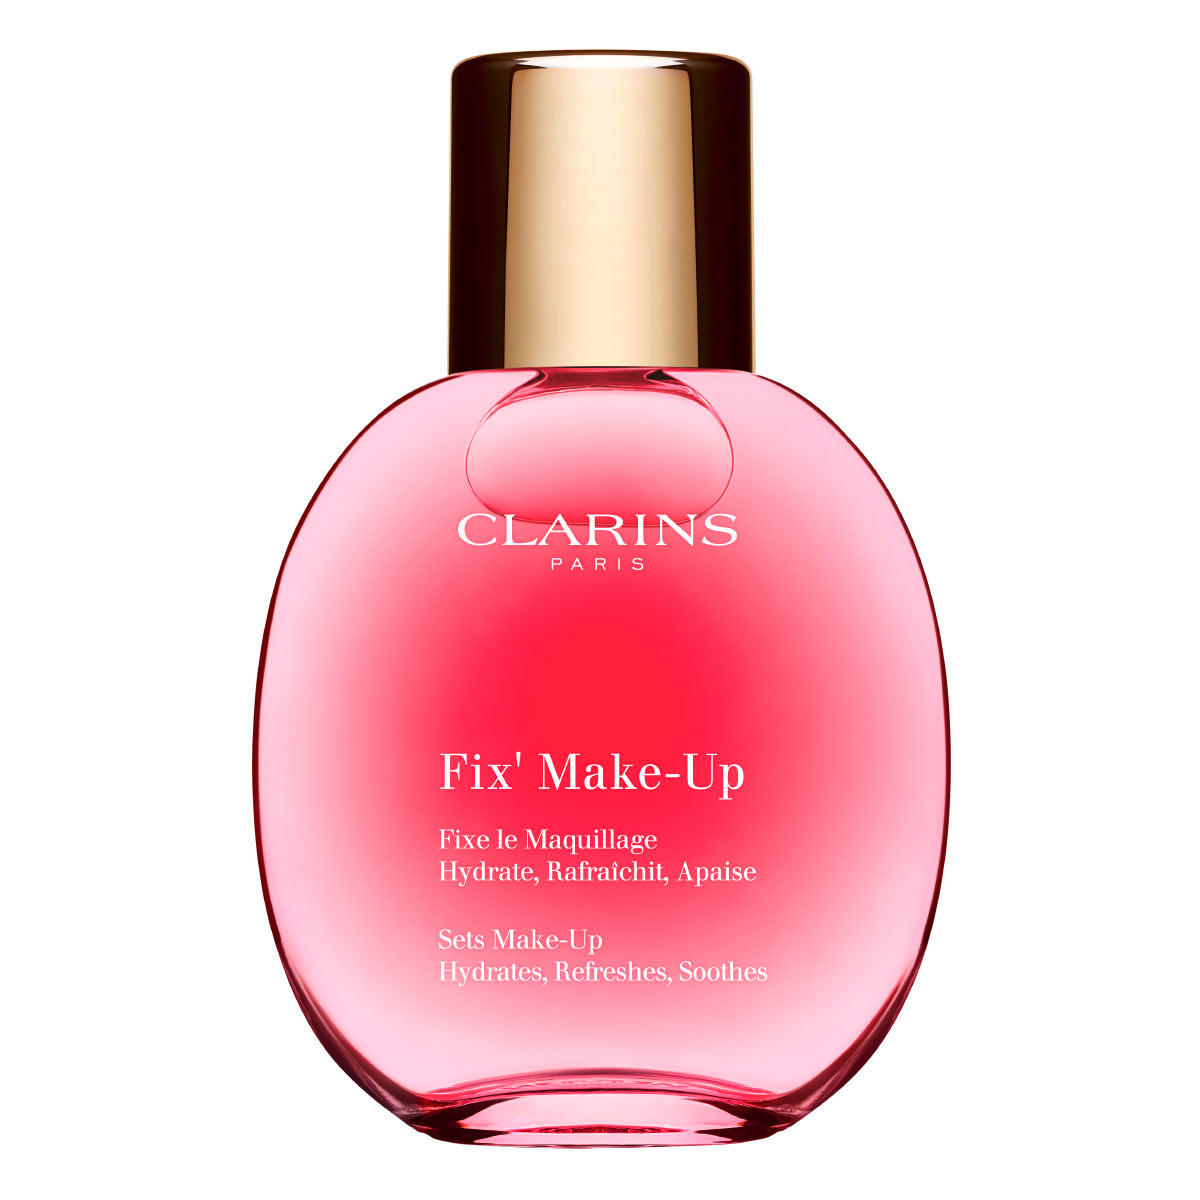 CLARINS Fixe le Maquillage 50 ml - 1